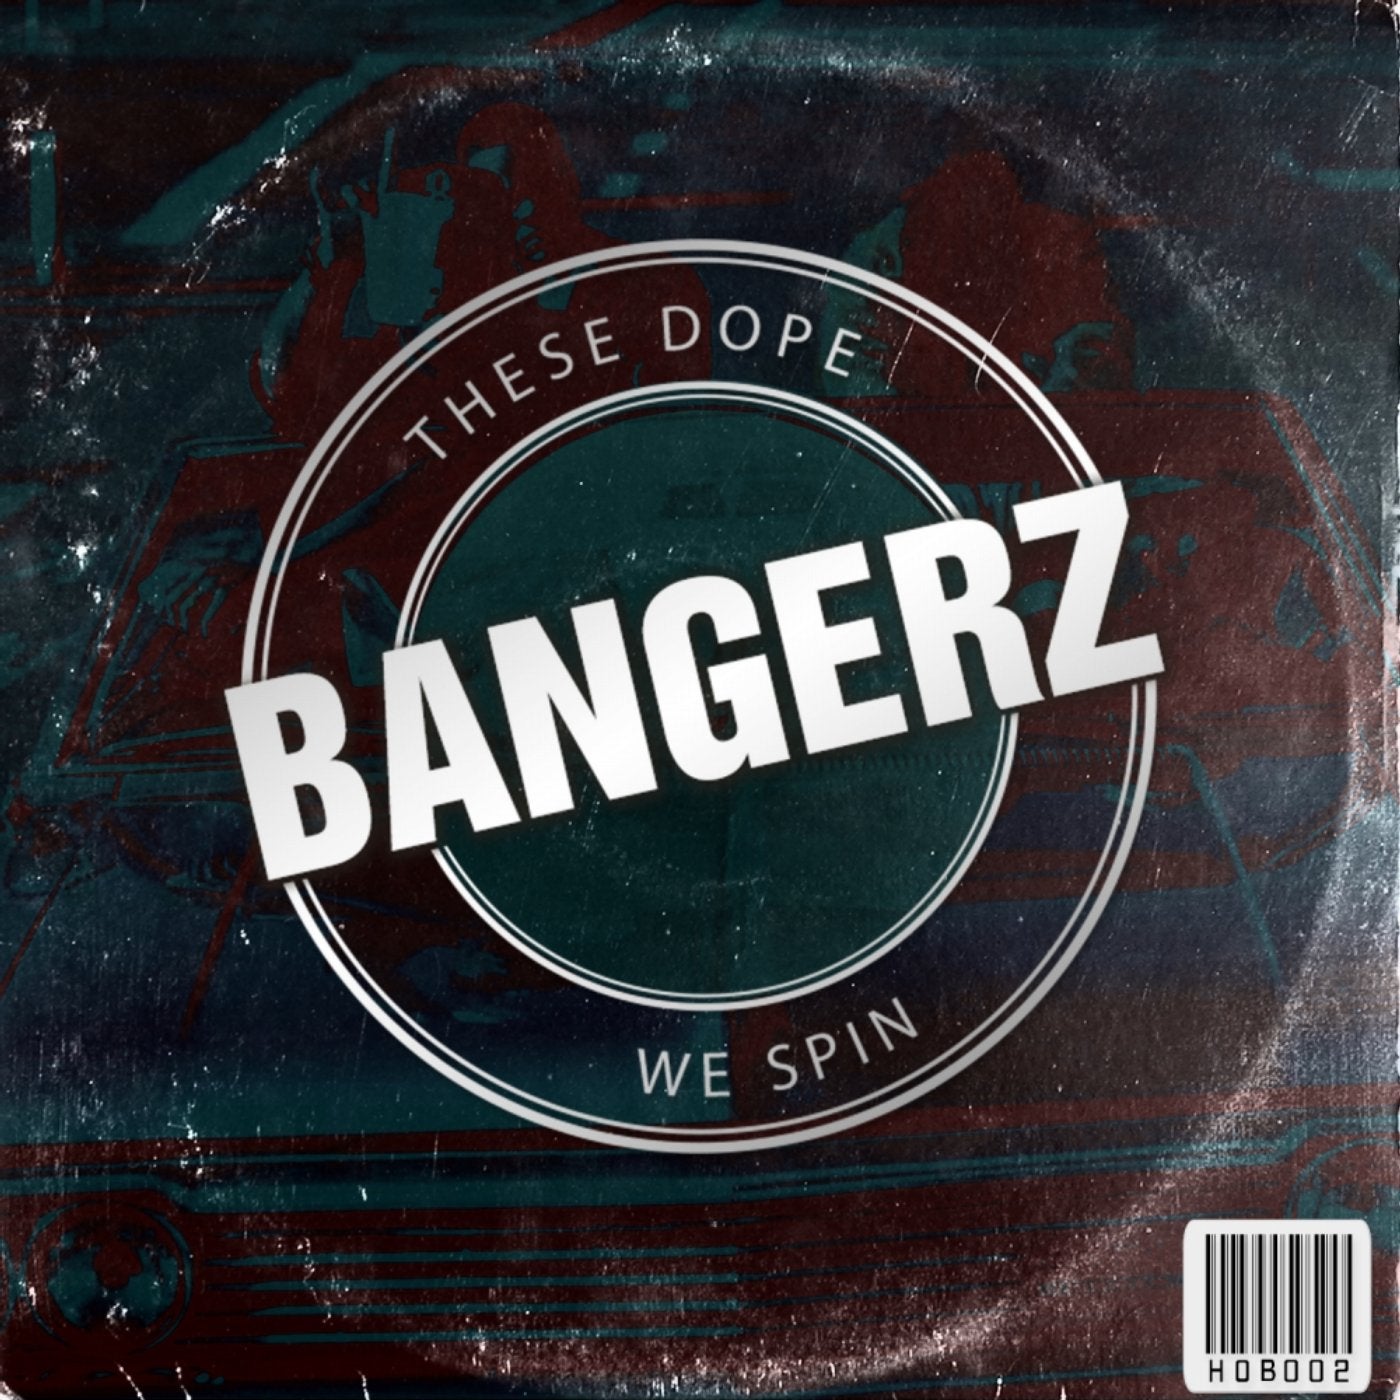 These Dope Bangerz We Spin